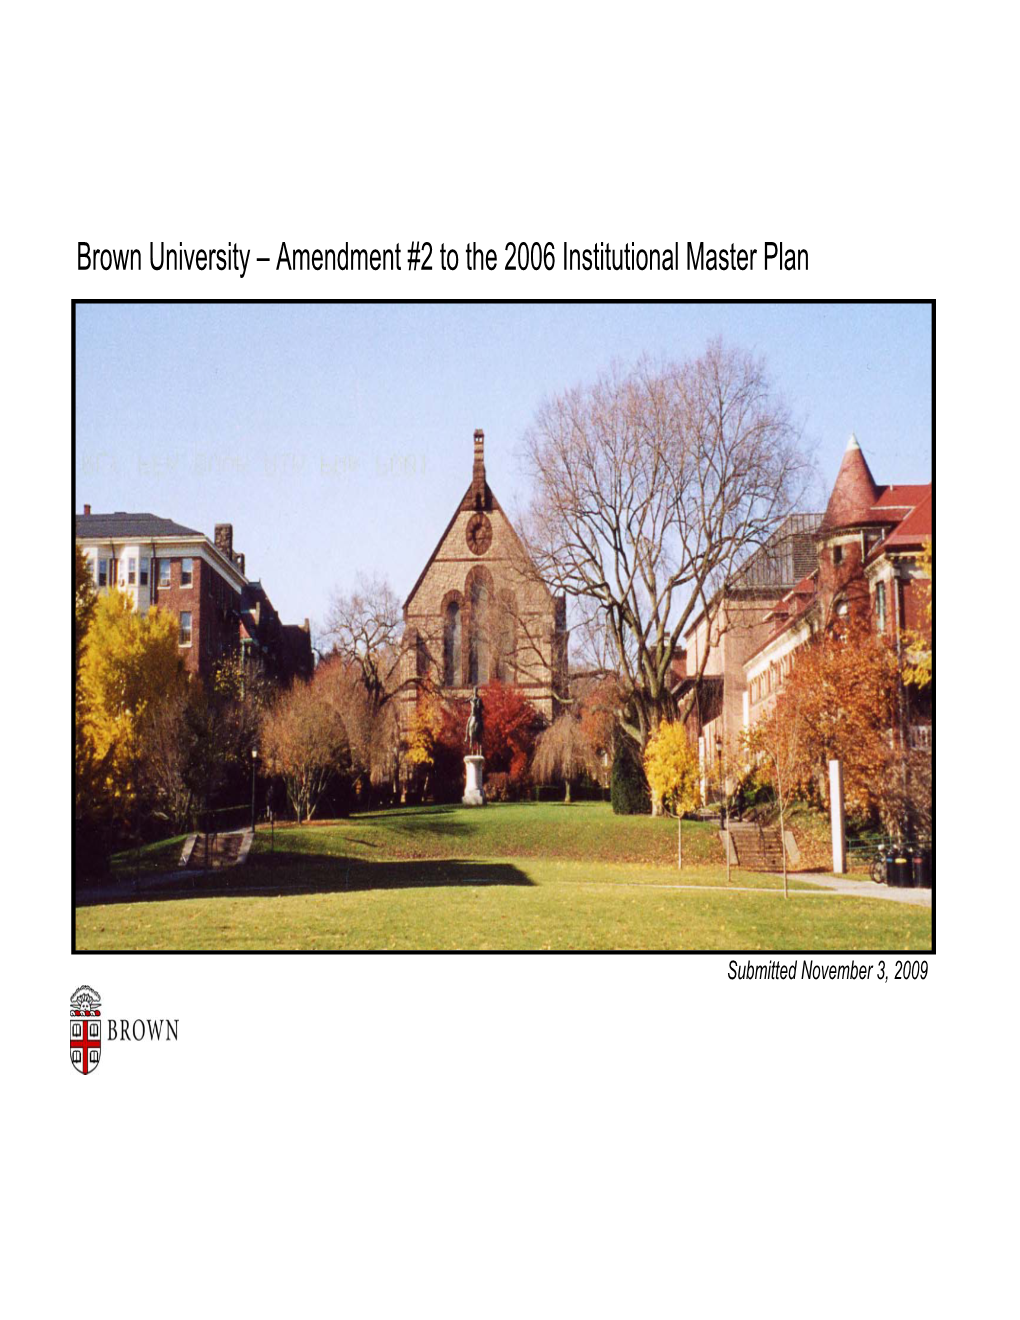 Brown University – Amendment #2 to the 2006 Institutional Master Plan